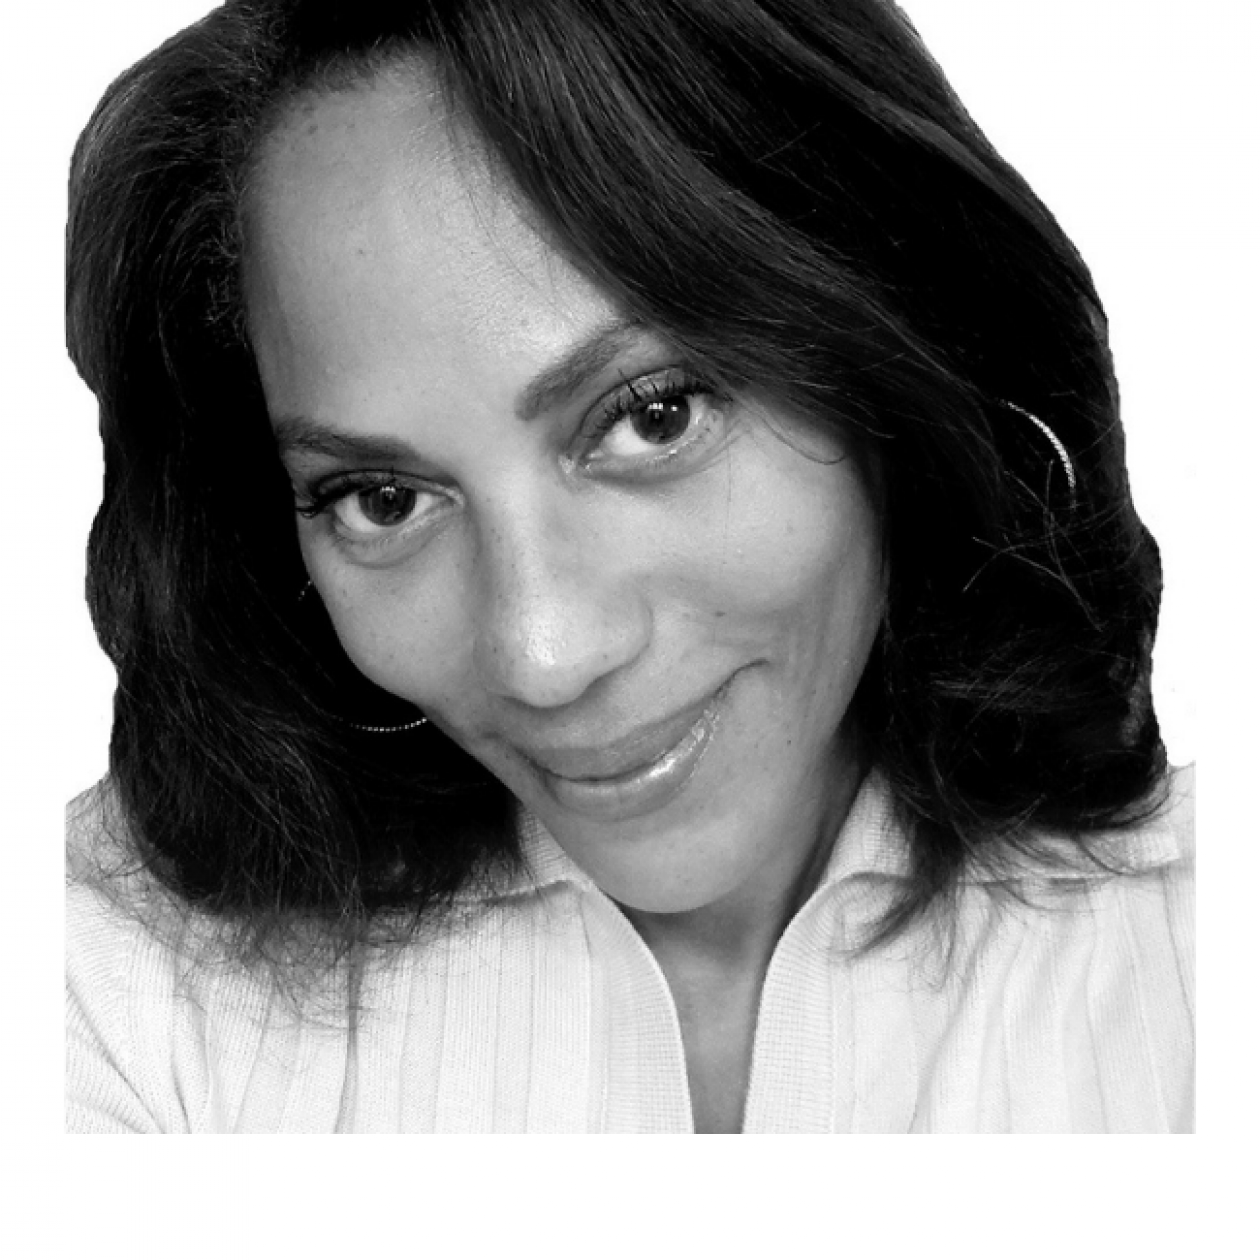 Monique Robinson smiling facing forward. The image is a black and white close-up of Monique's face.